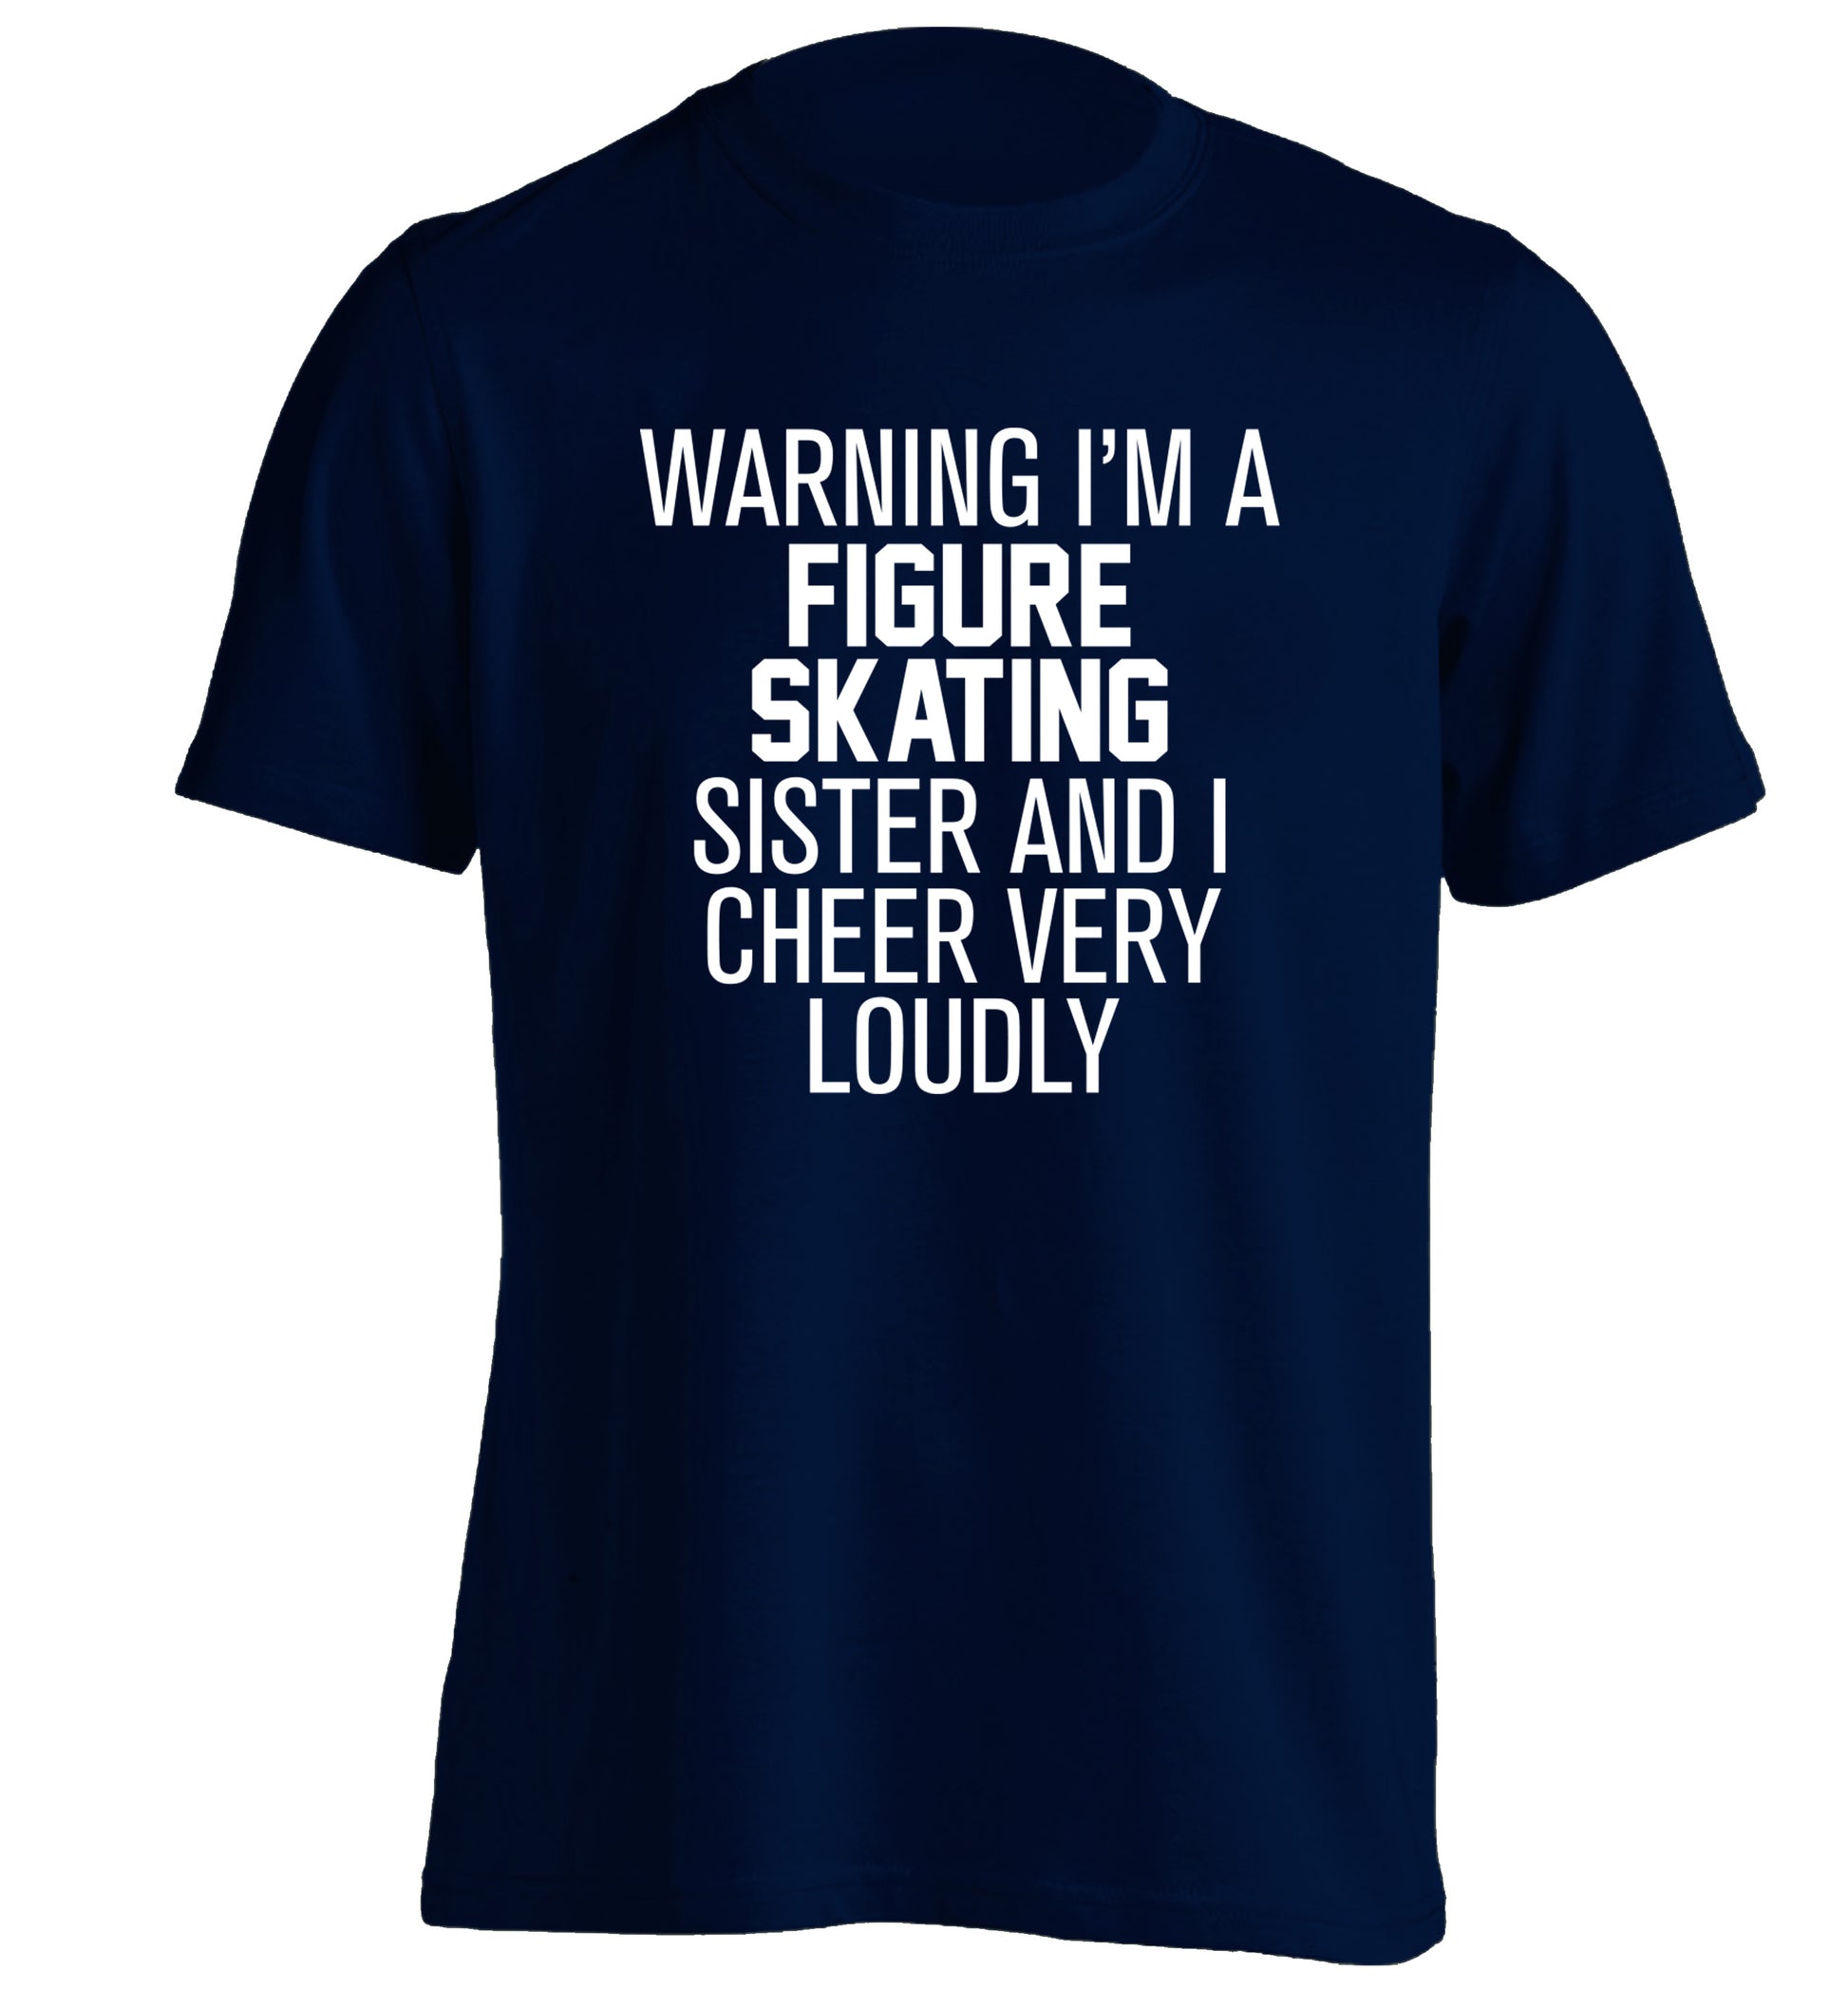 Warning I'm a figure skating sister and I cheer very loudly adults unisexnavy Tshirt 2XL